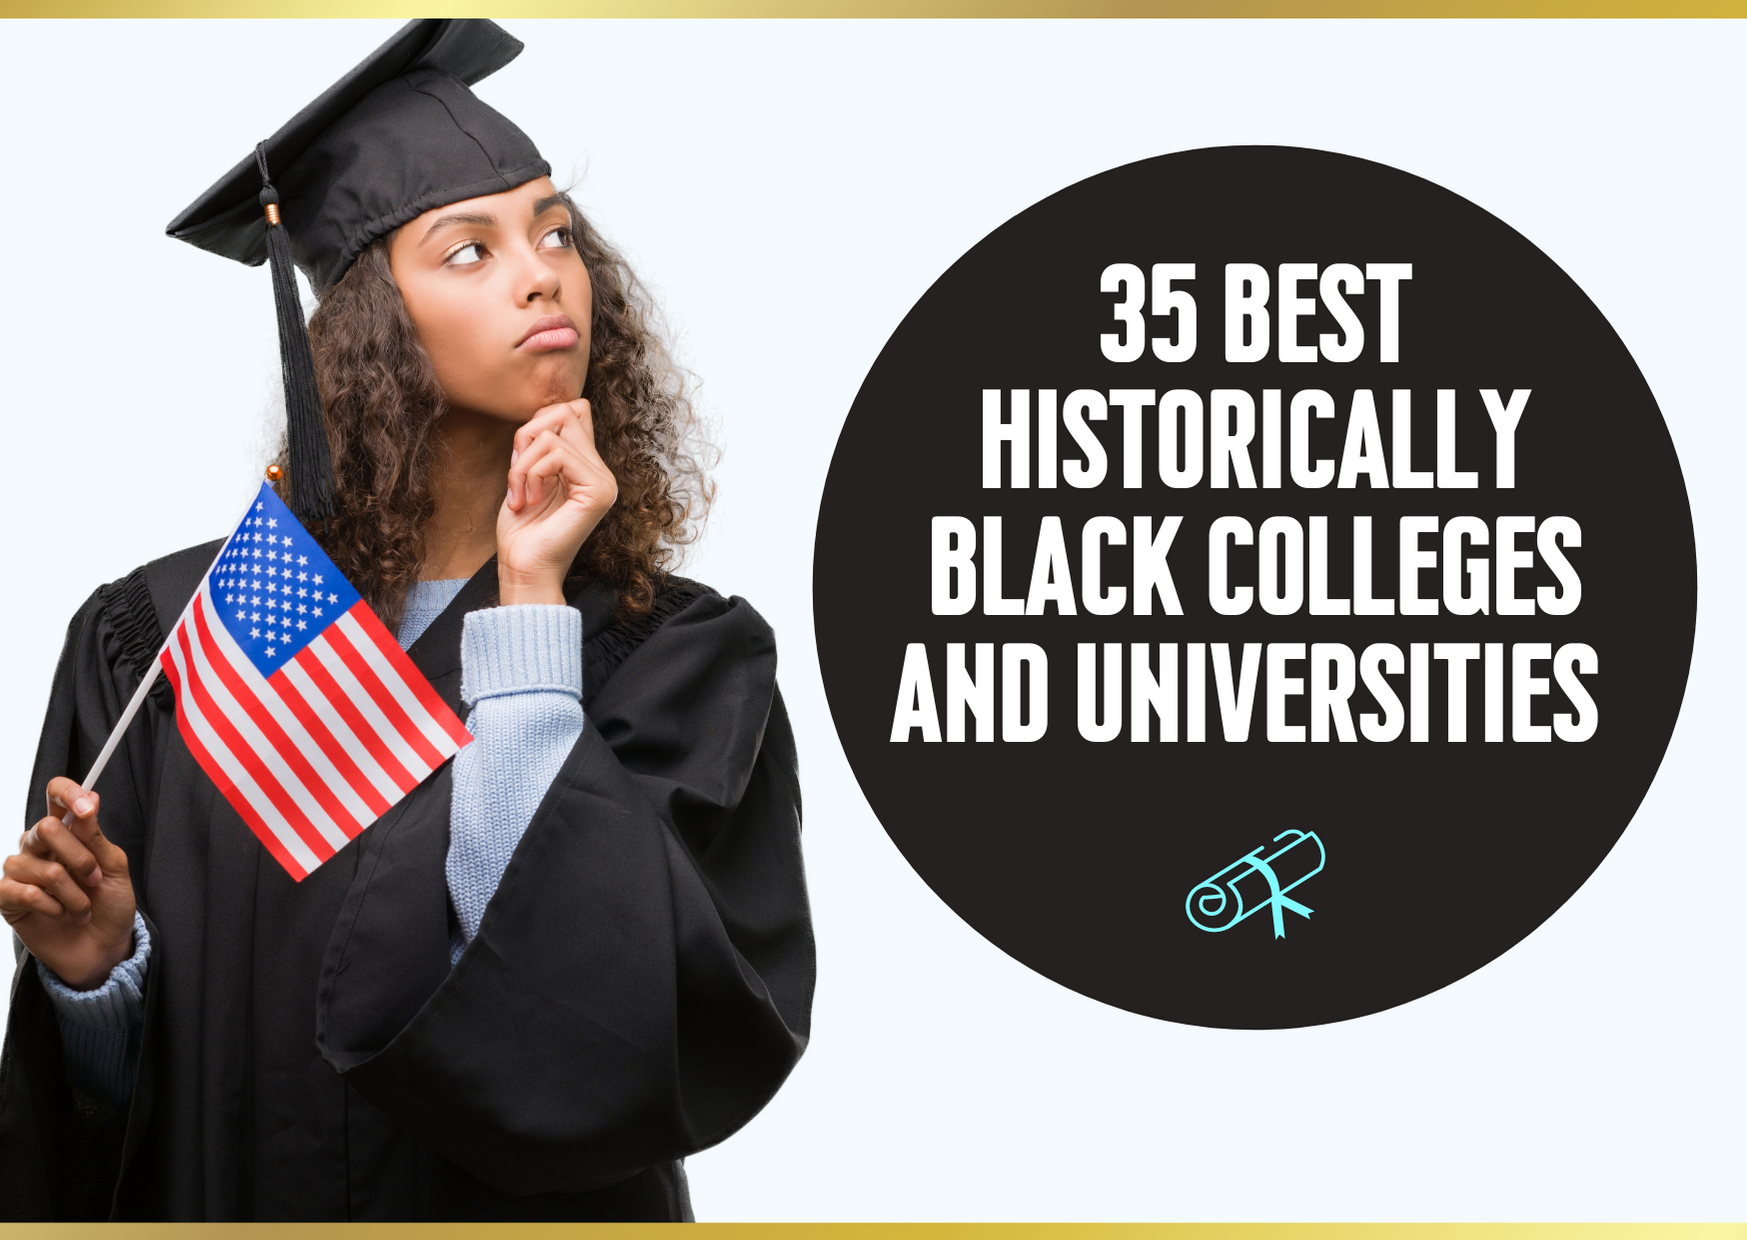 research on historically black colleges and universities